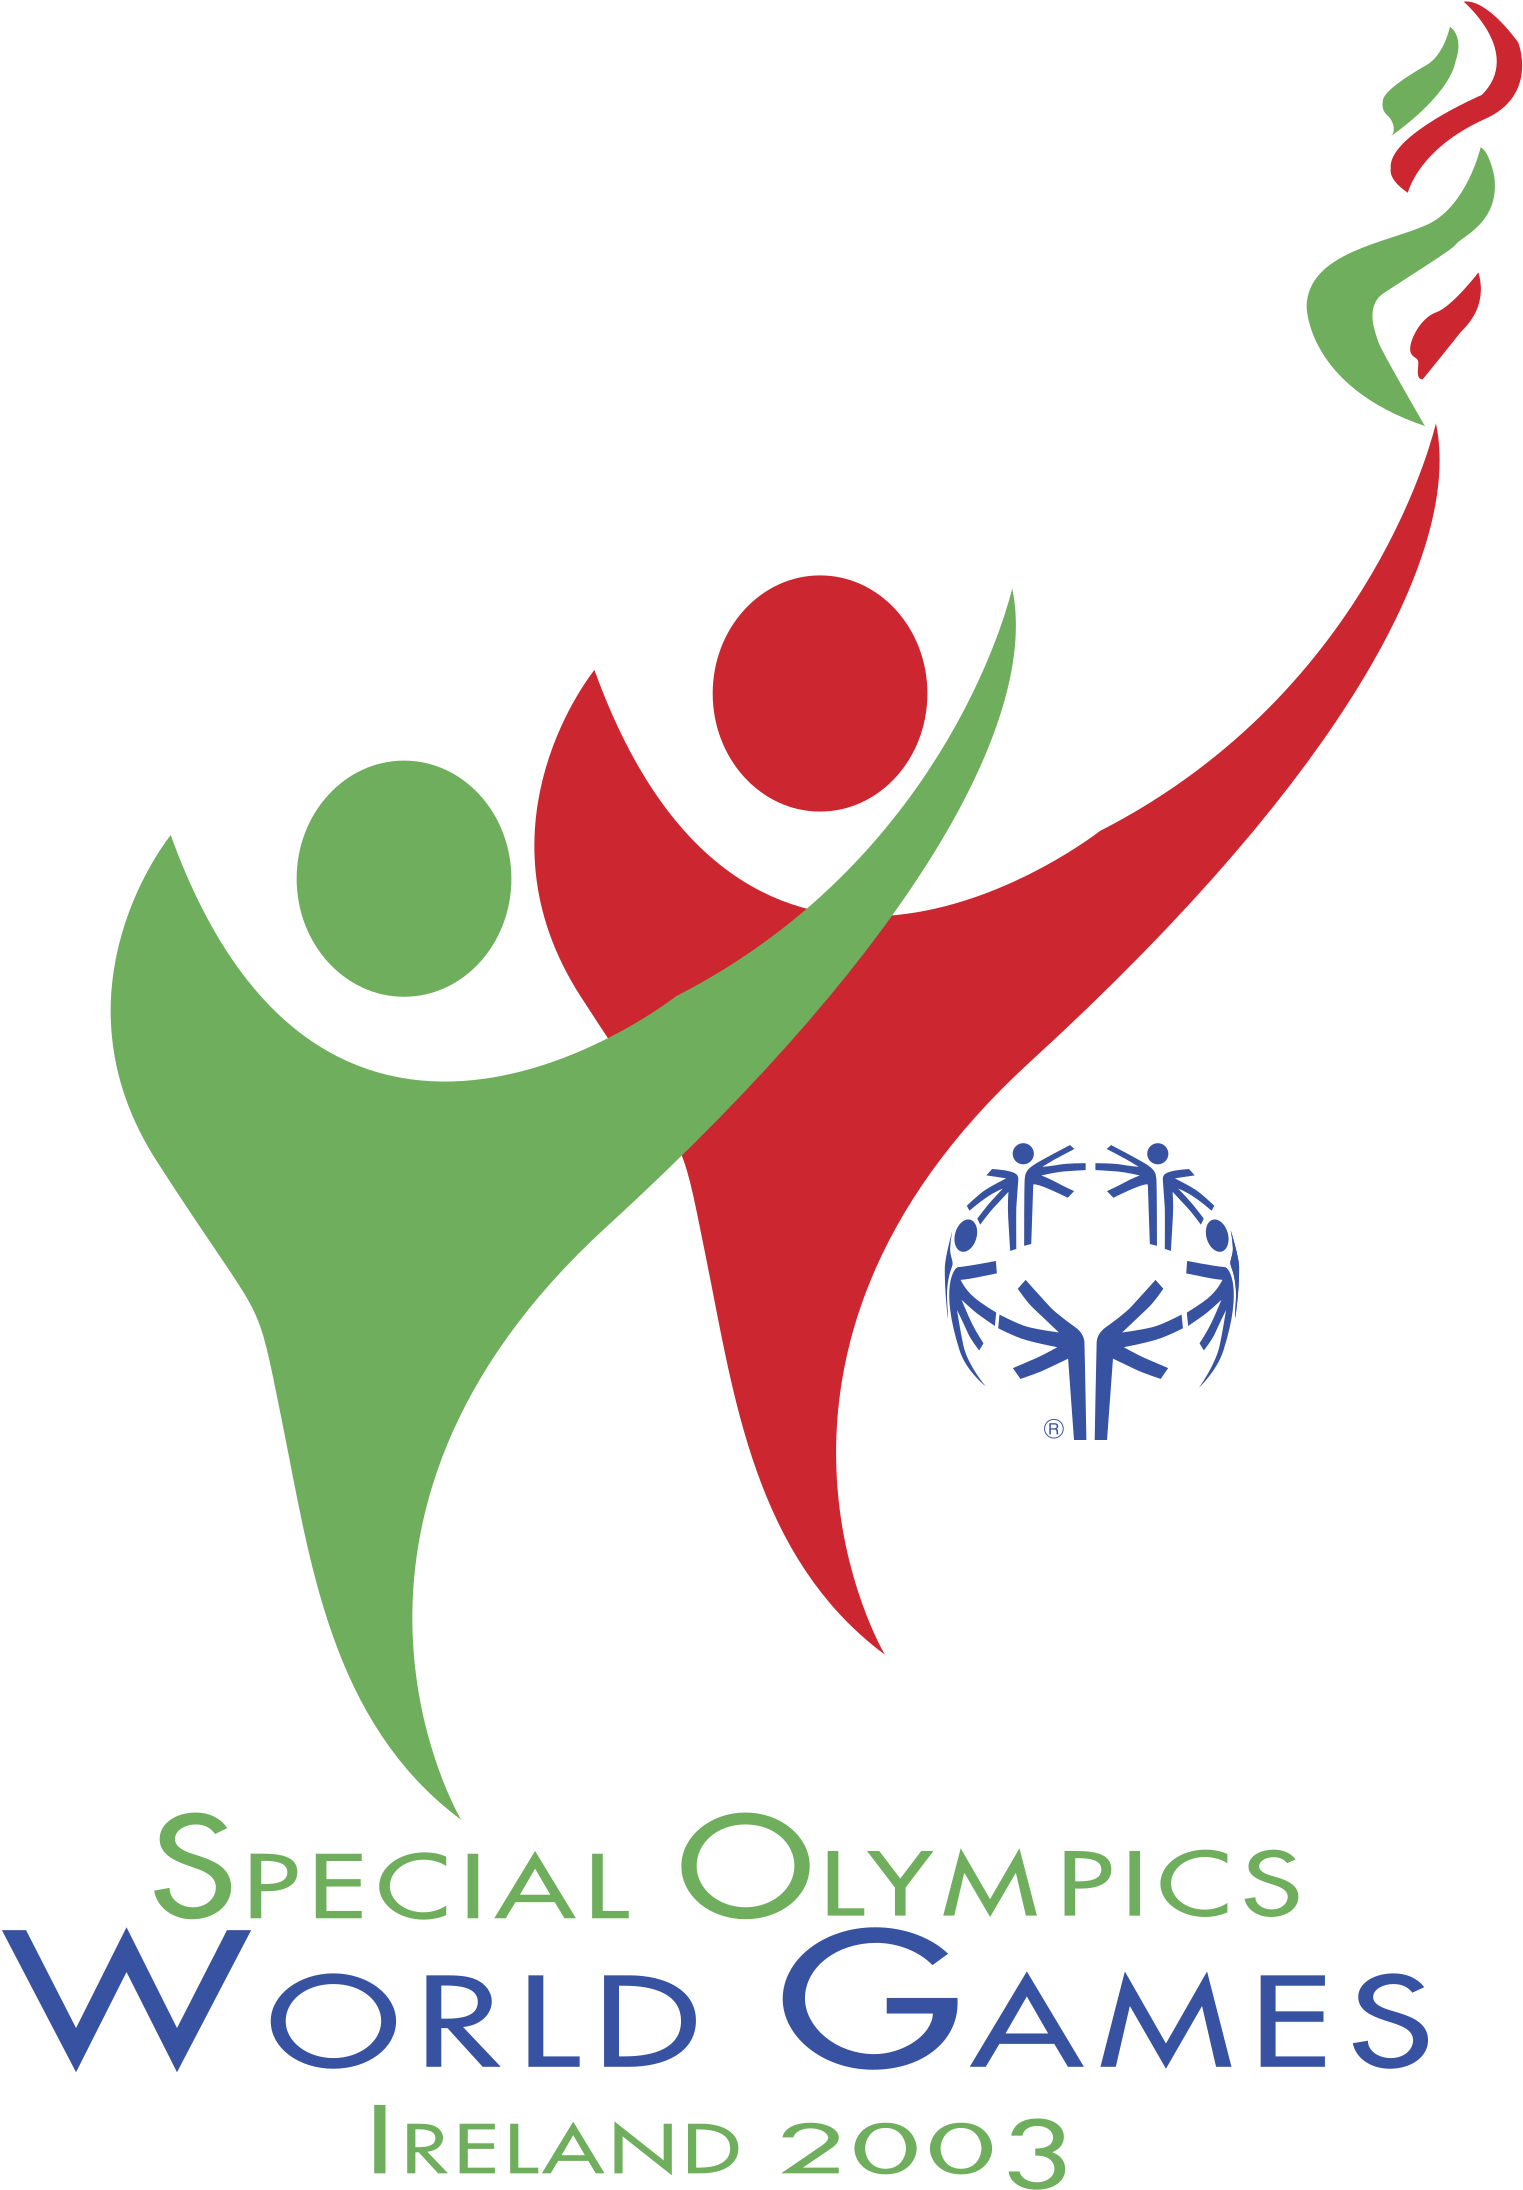 Download Special Olympics World Games Ireland 2003 Logo Png Special Olympics Ireland 2003 Png Image With No Background Pngkey Com